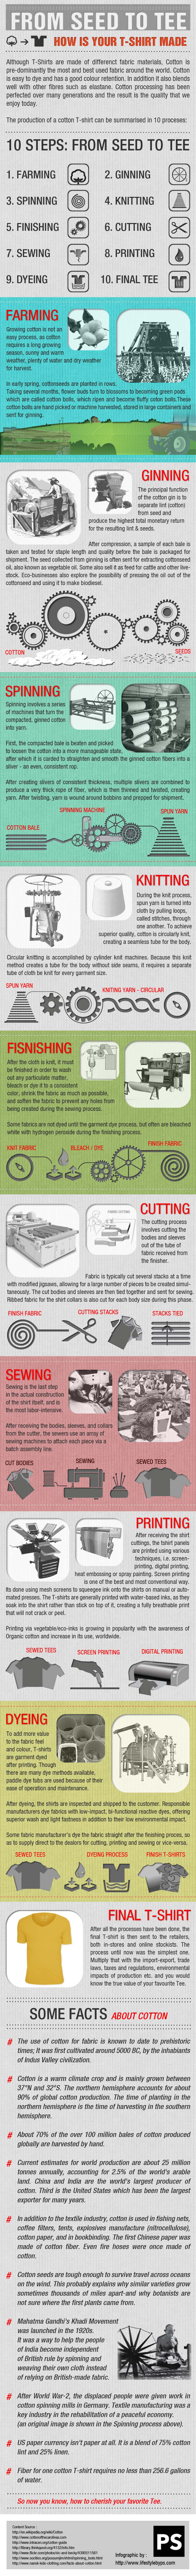 How t-shirts are made - infographic